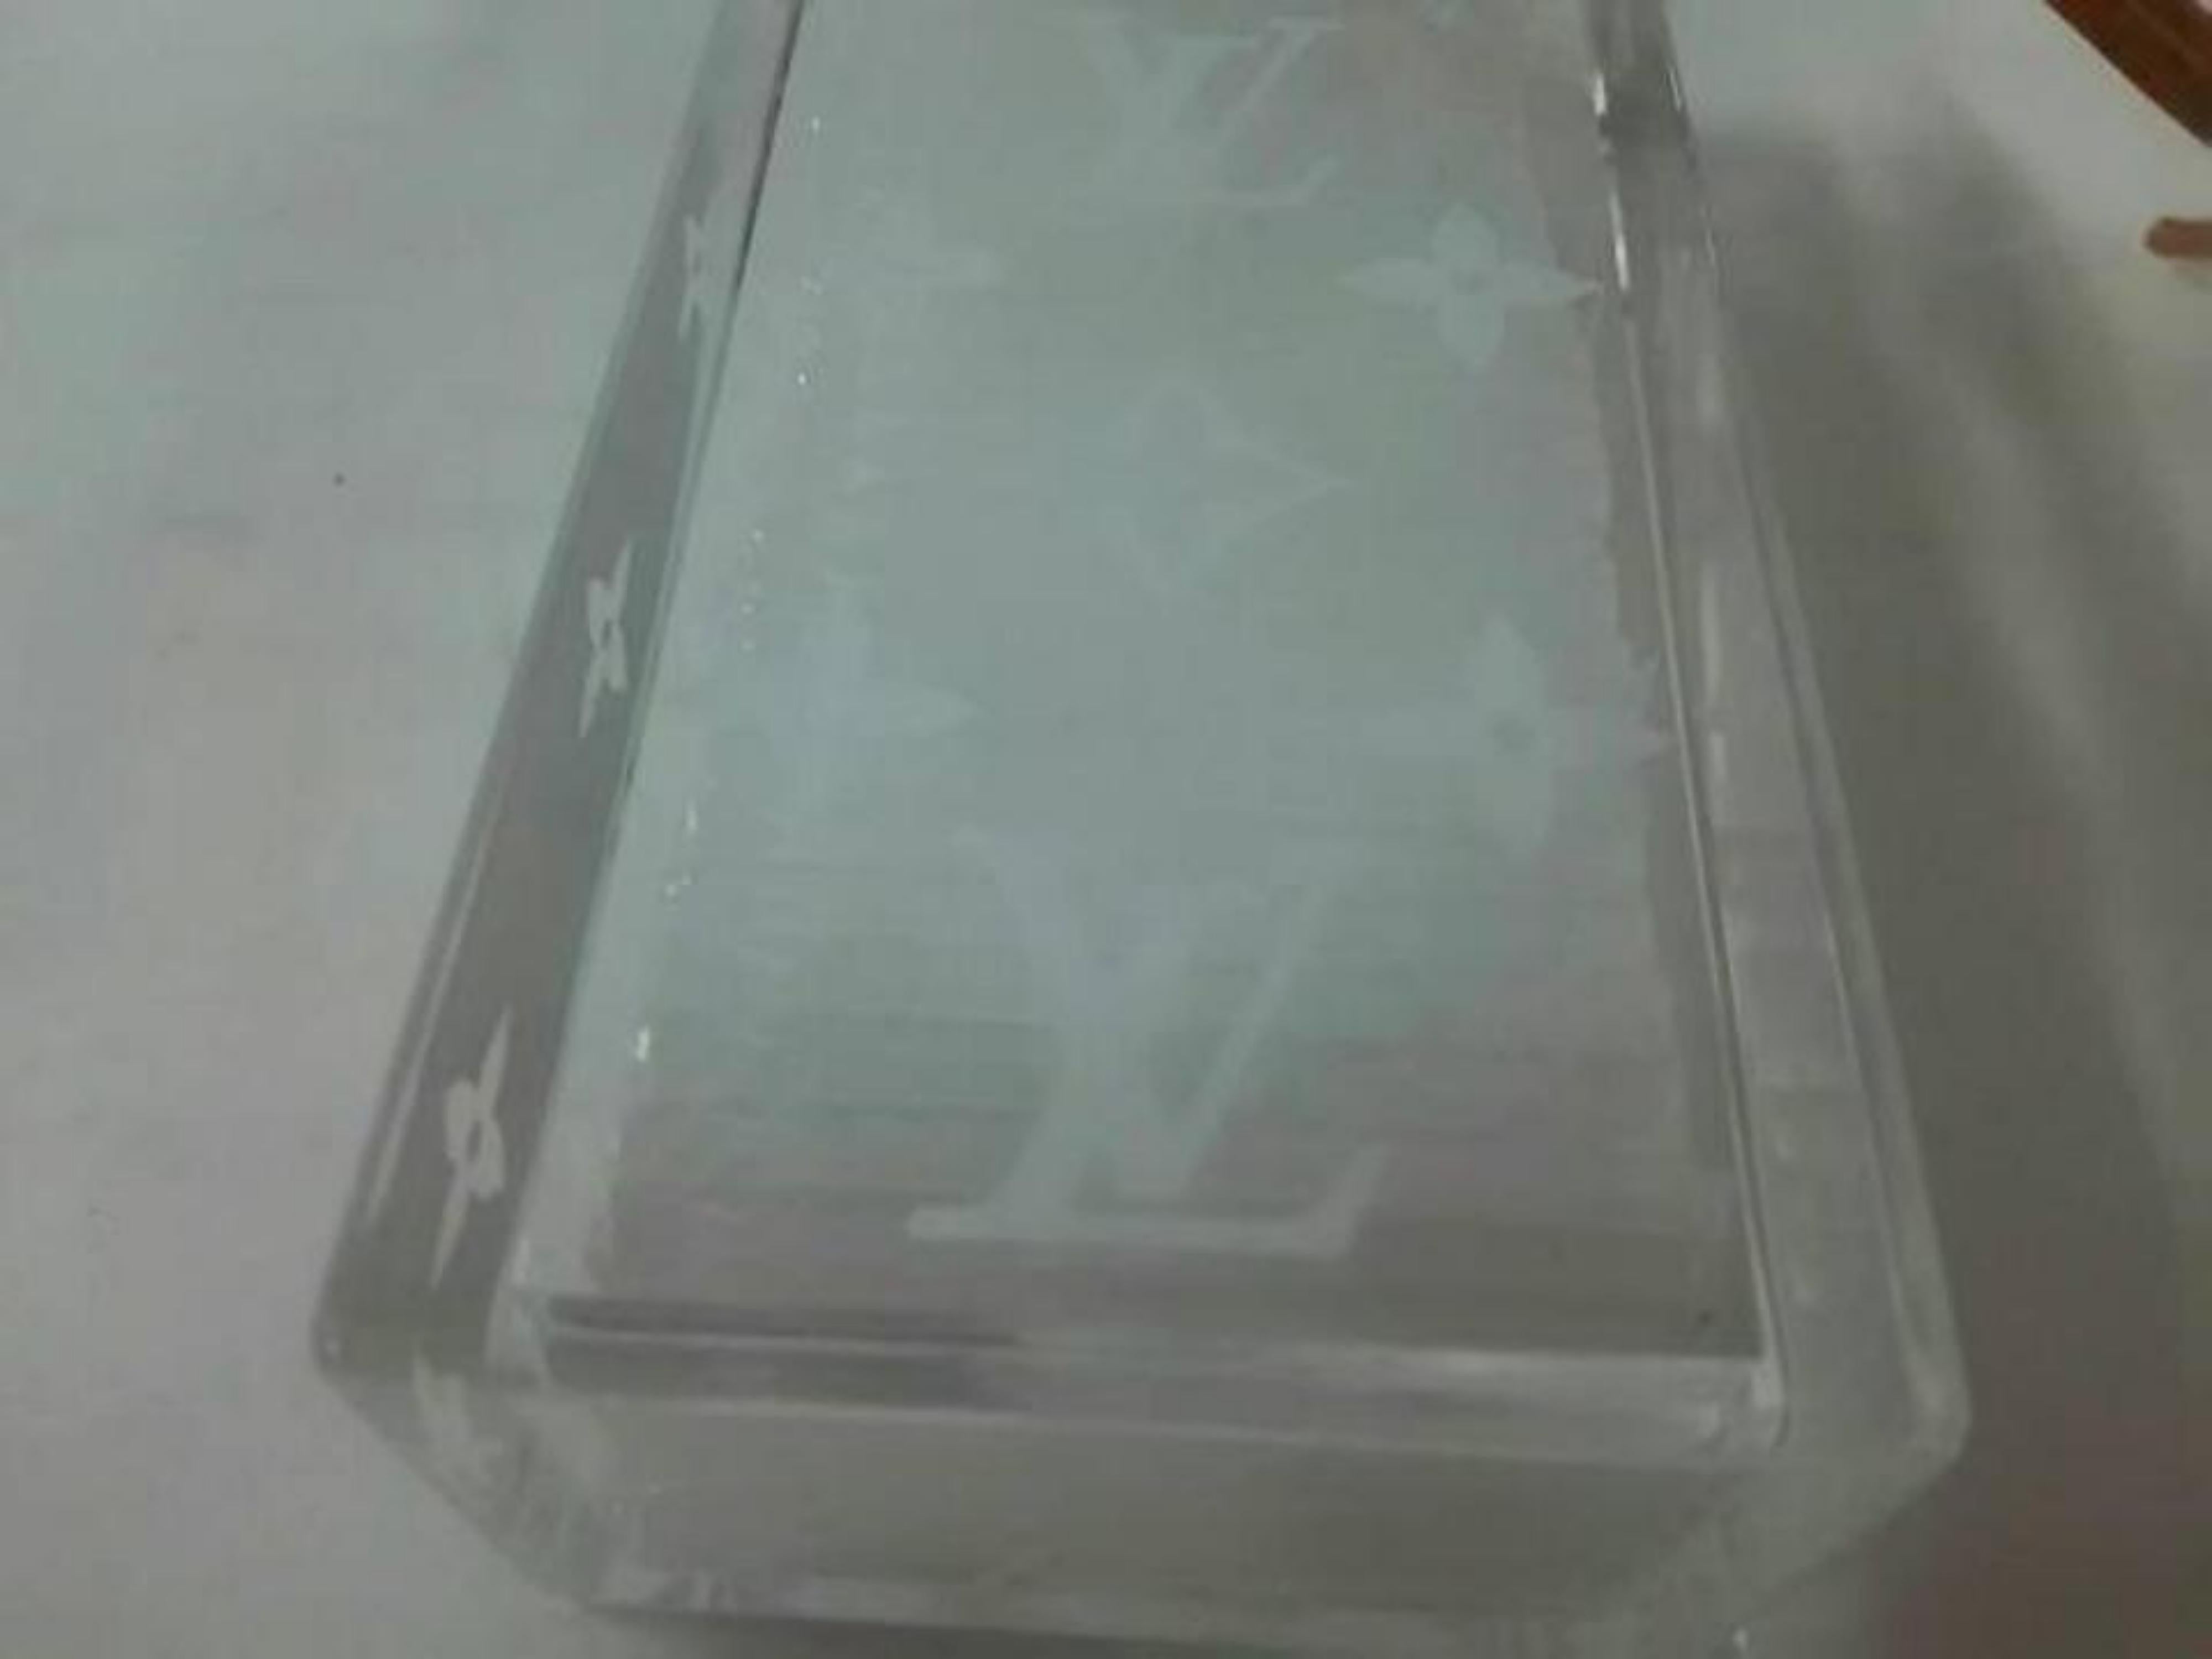 Louis Vuitton Clear (Ultra Rare) Monogram Dominoes Case with Domino Set 234035 For Sale 3